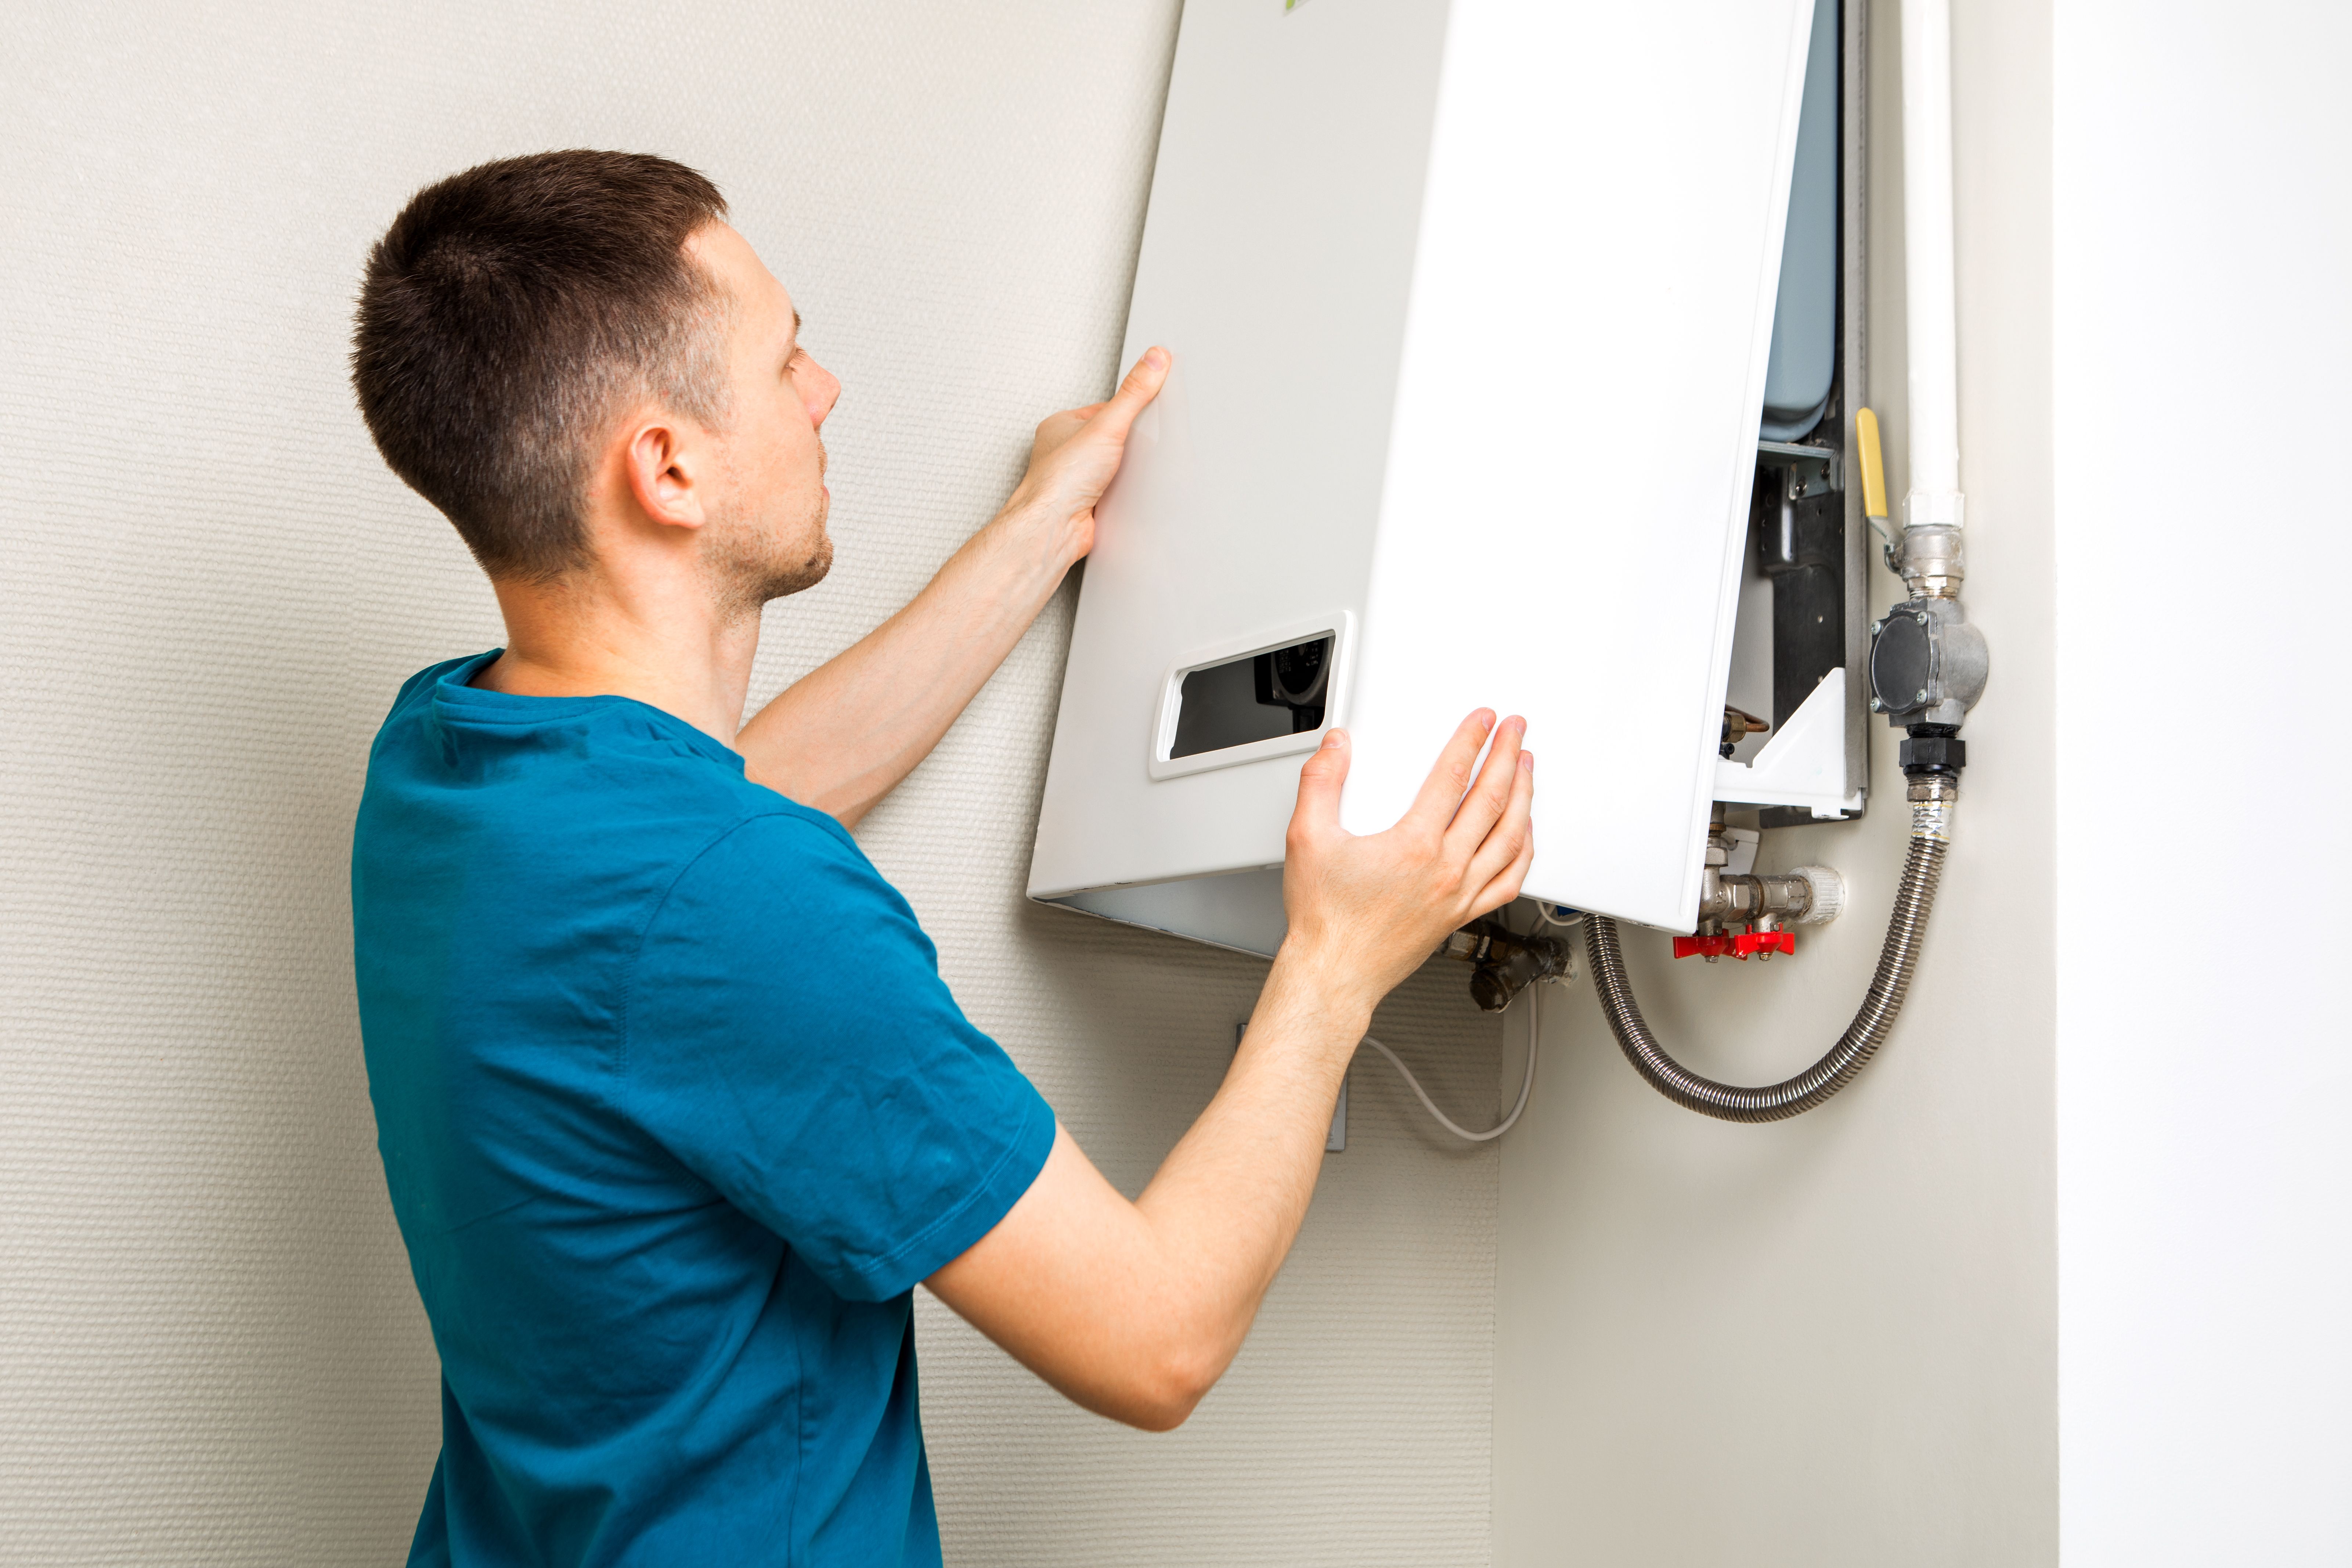 plumber-attaches-trying-fix-problem-with-residential-heating-equipment-repair-gas-boiler (1).jpg